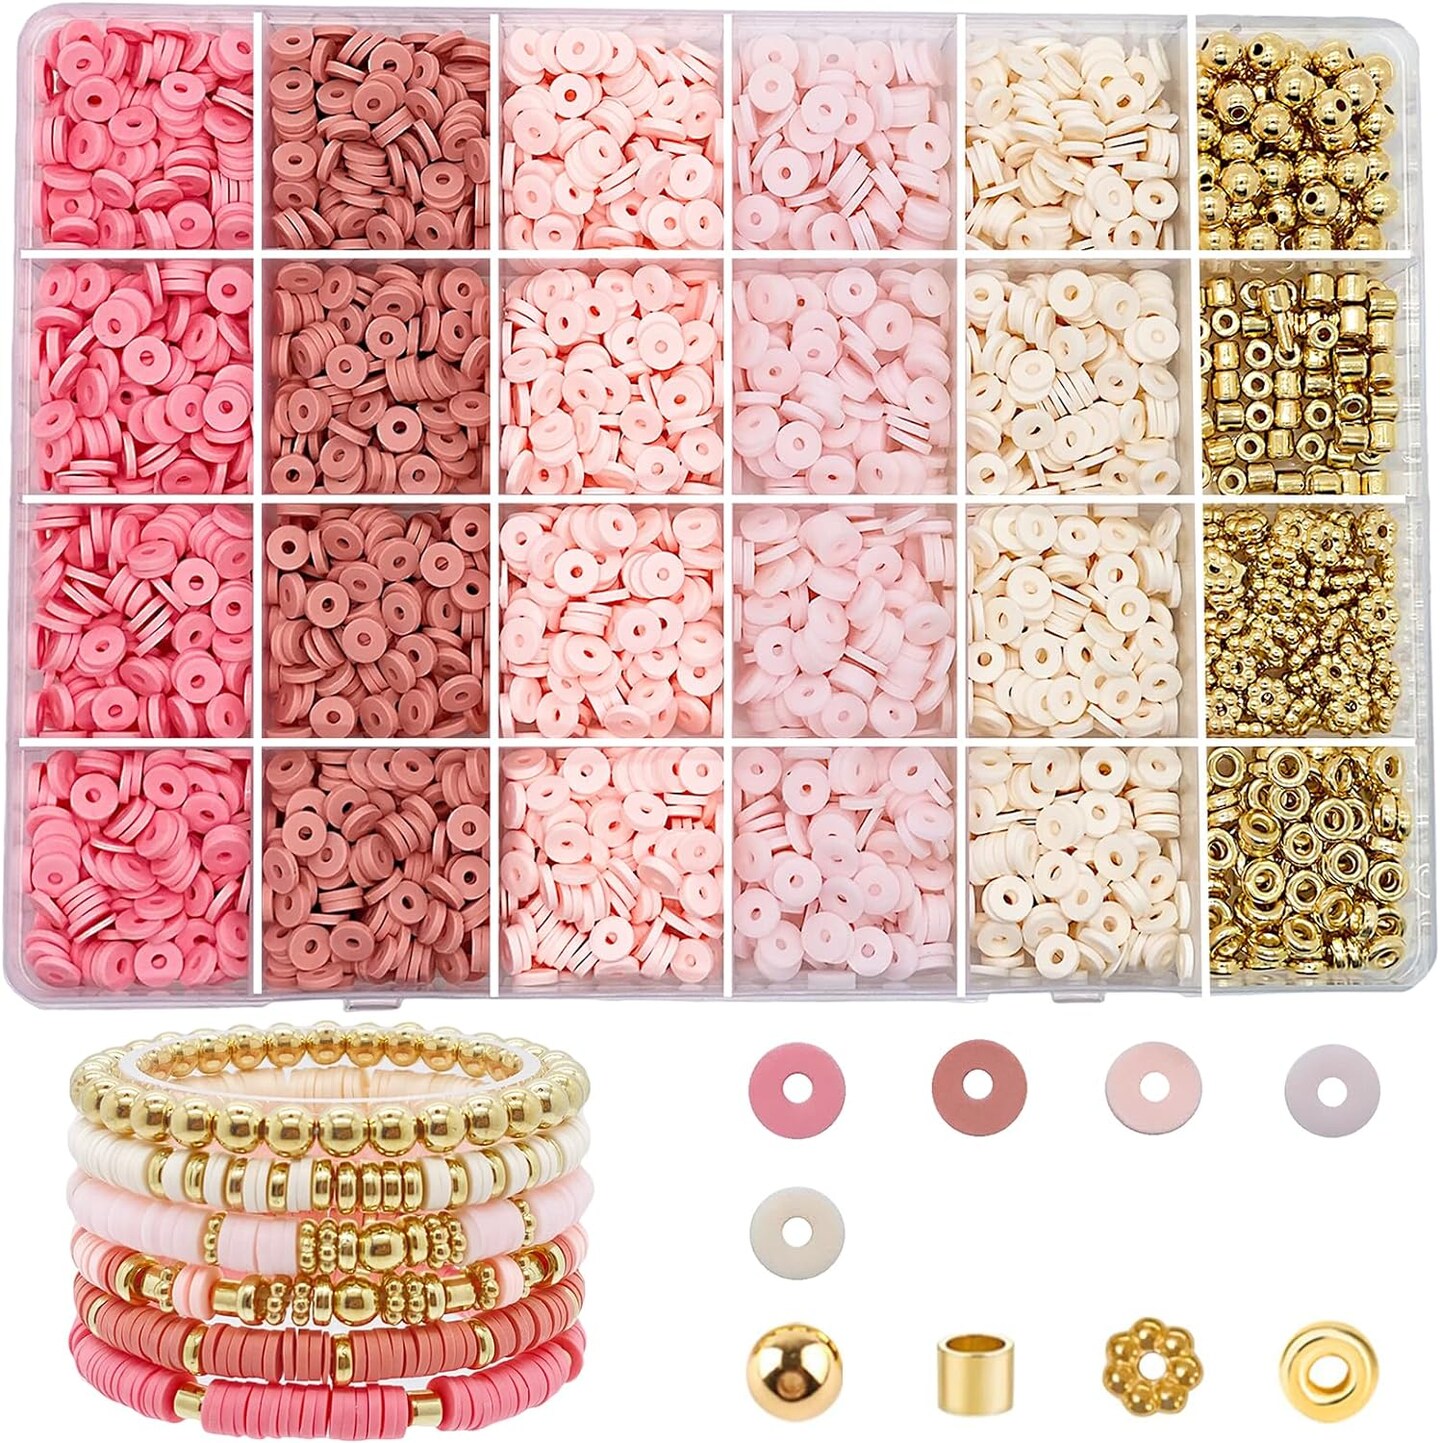 6 mm. Round Clay Beads for Bracelets Making 4320 pcs